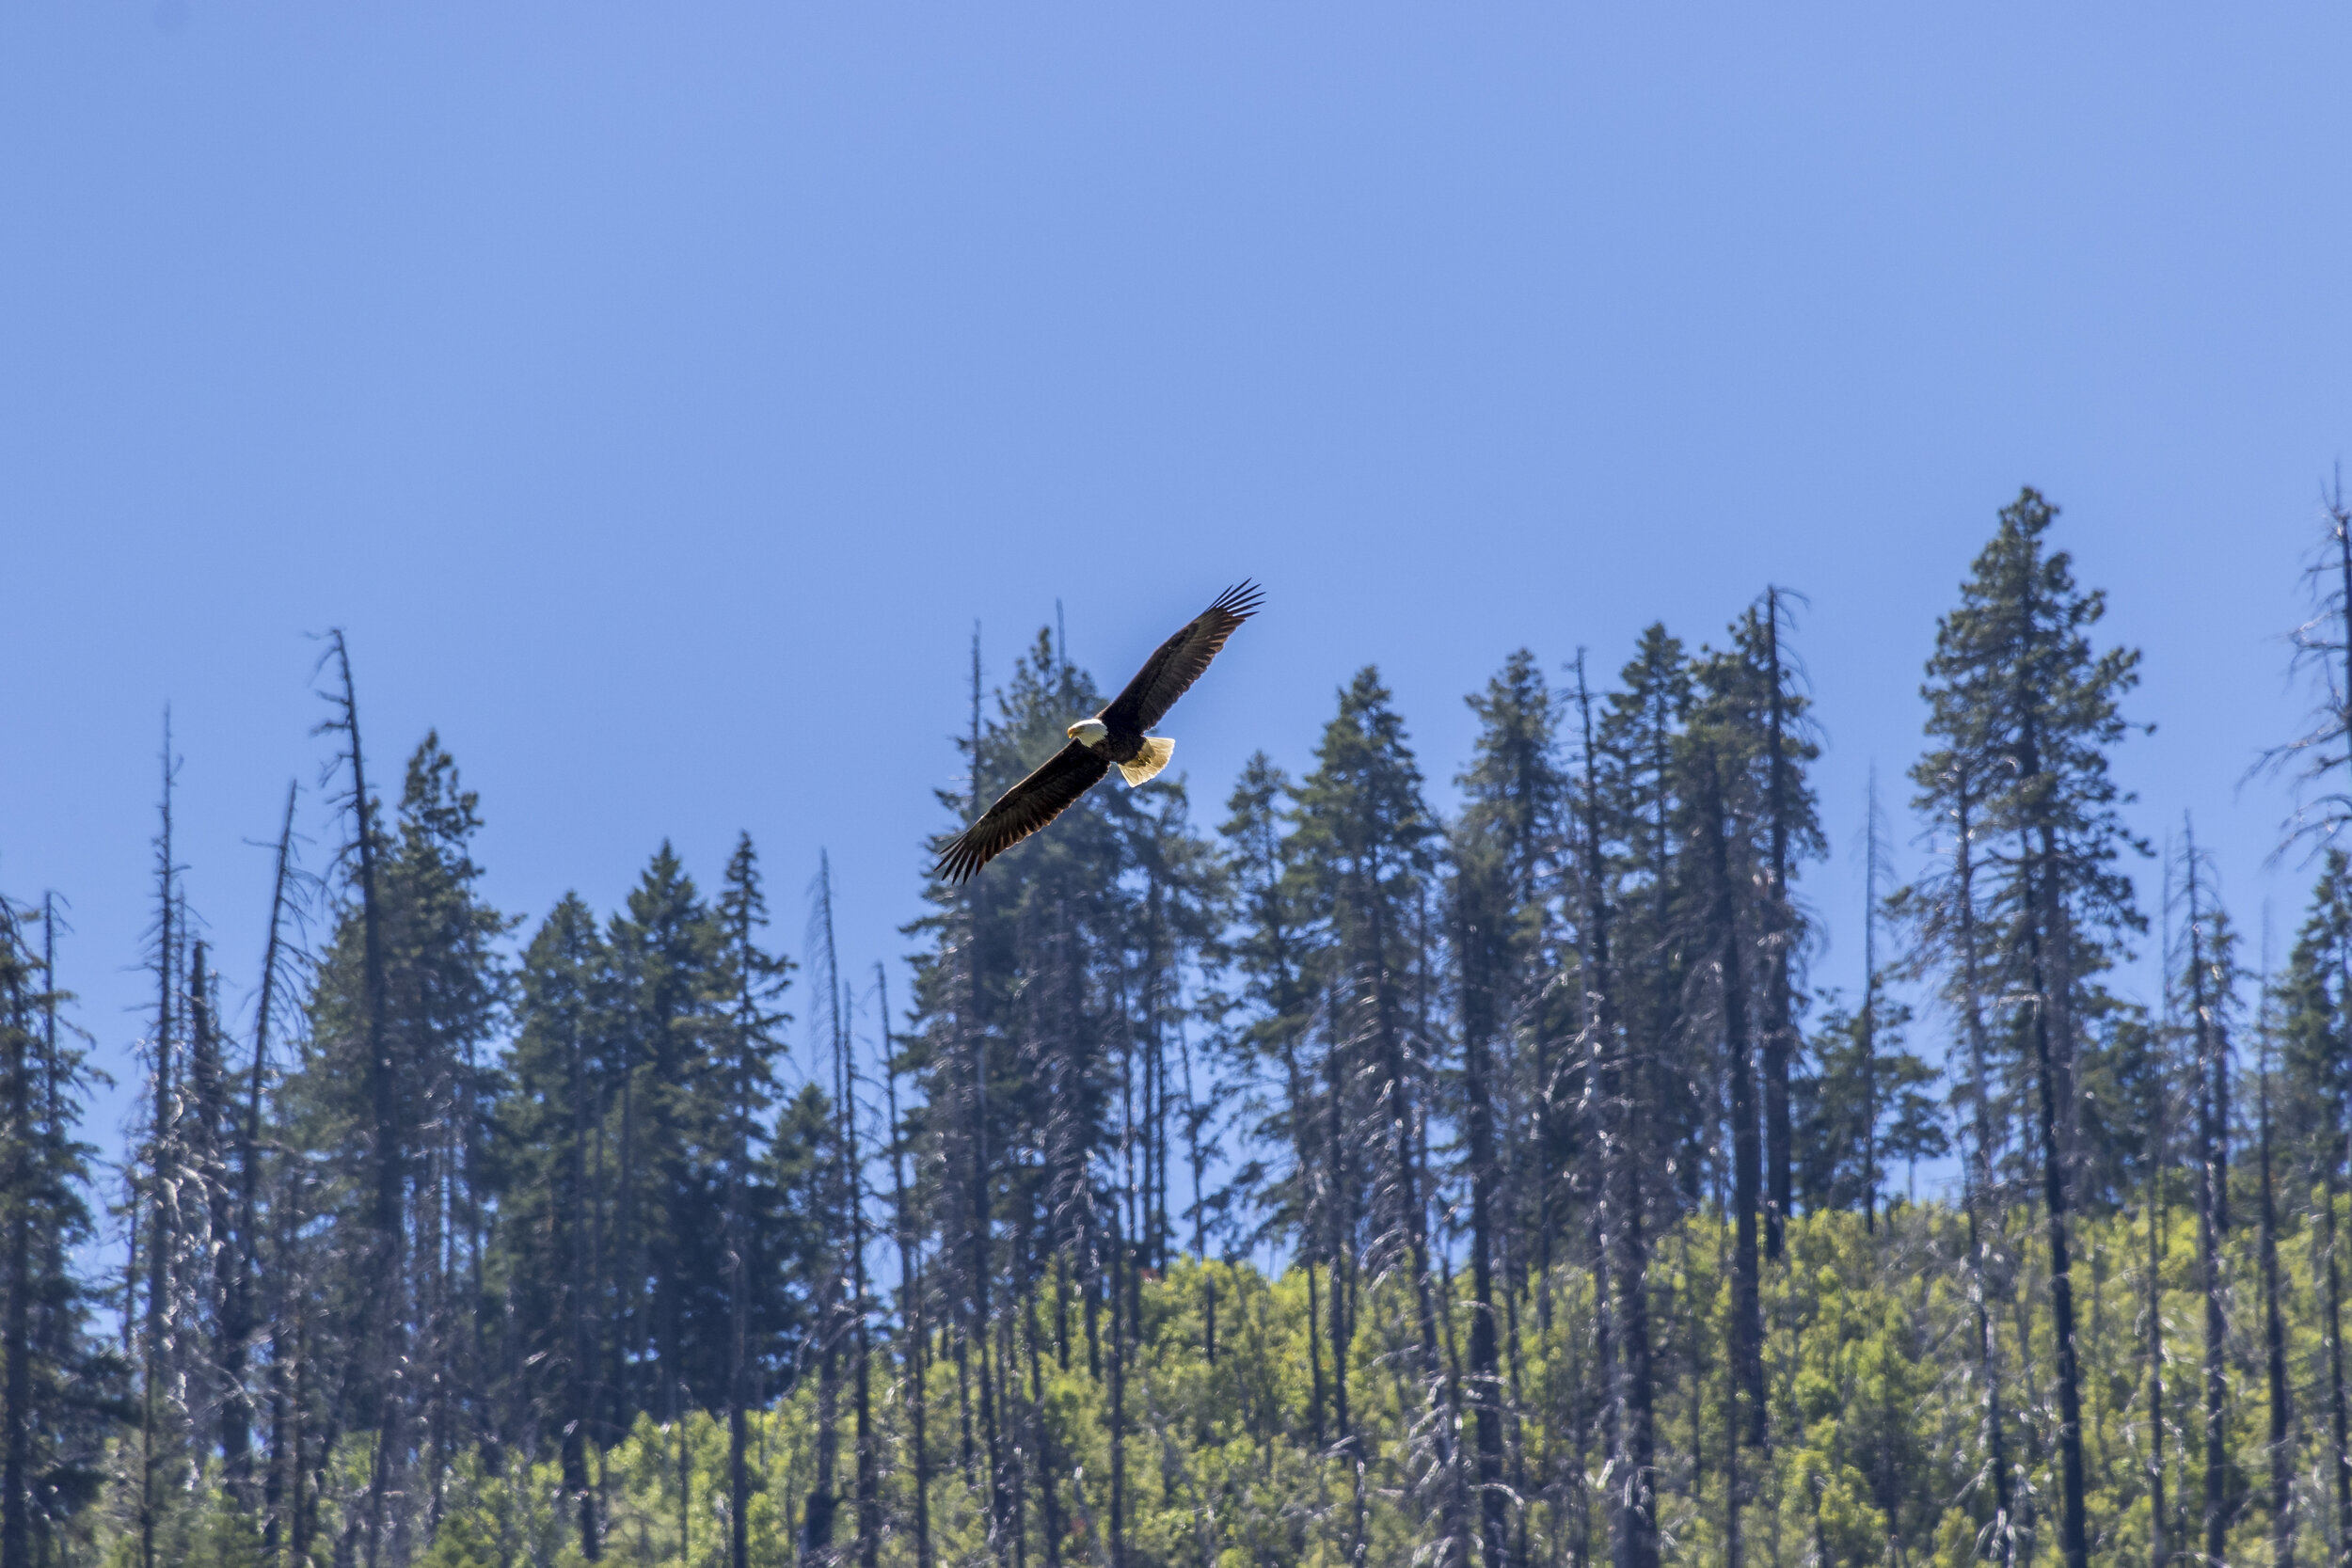 Bald eagles and other wildlife abound on the Rogue. Photo: Liz Miheve